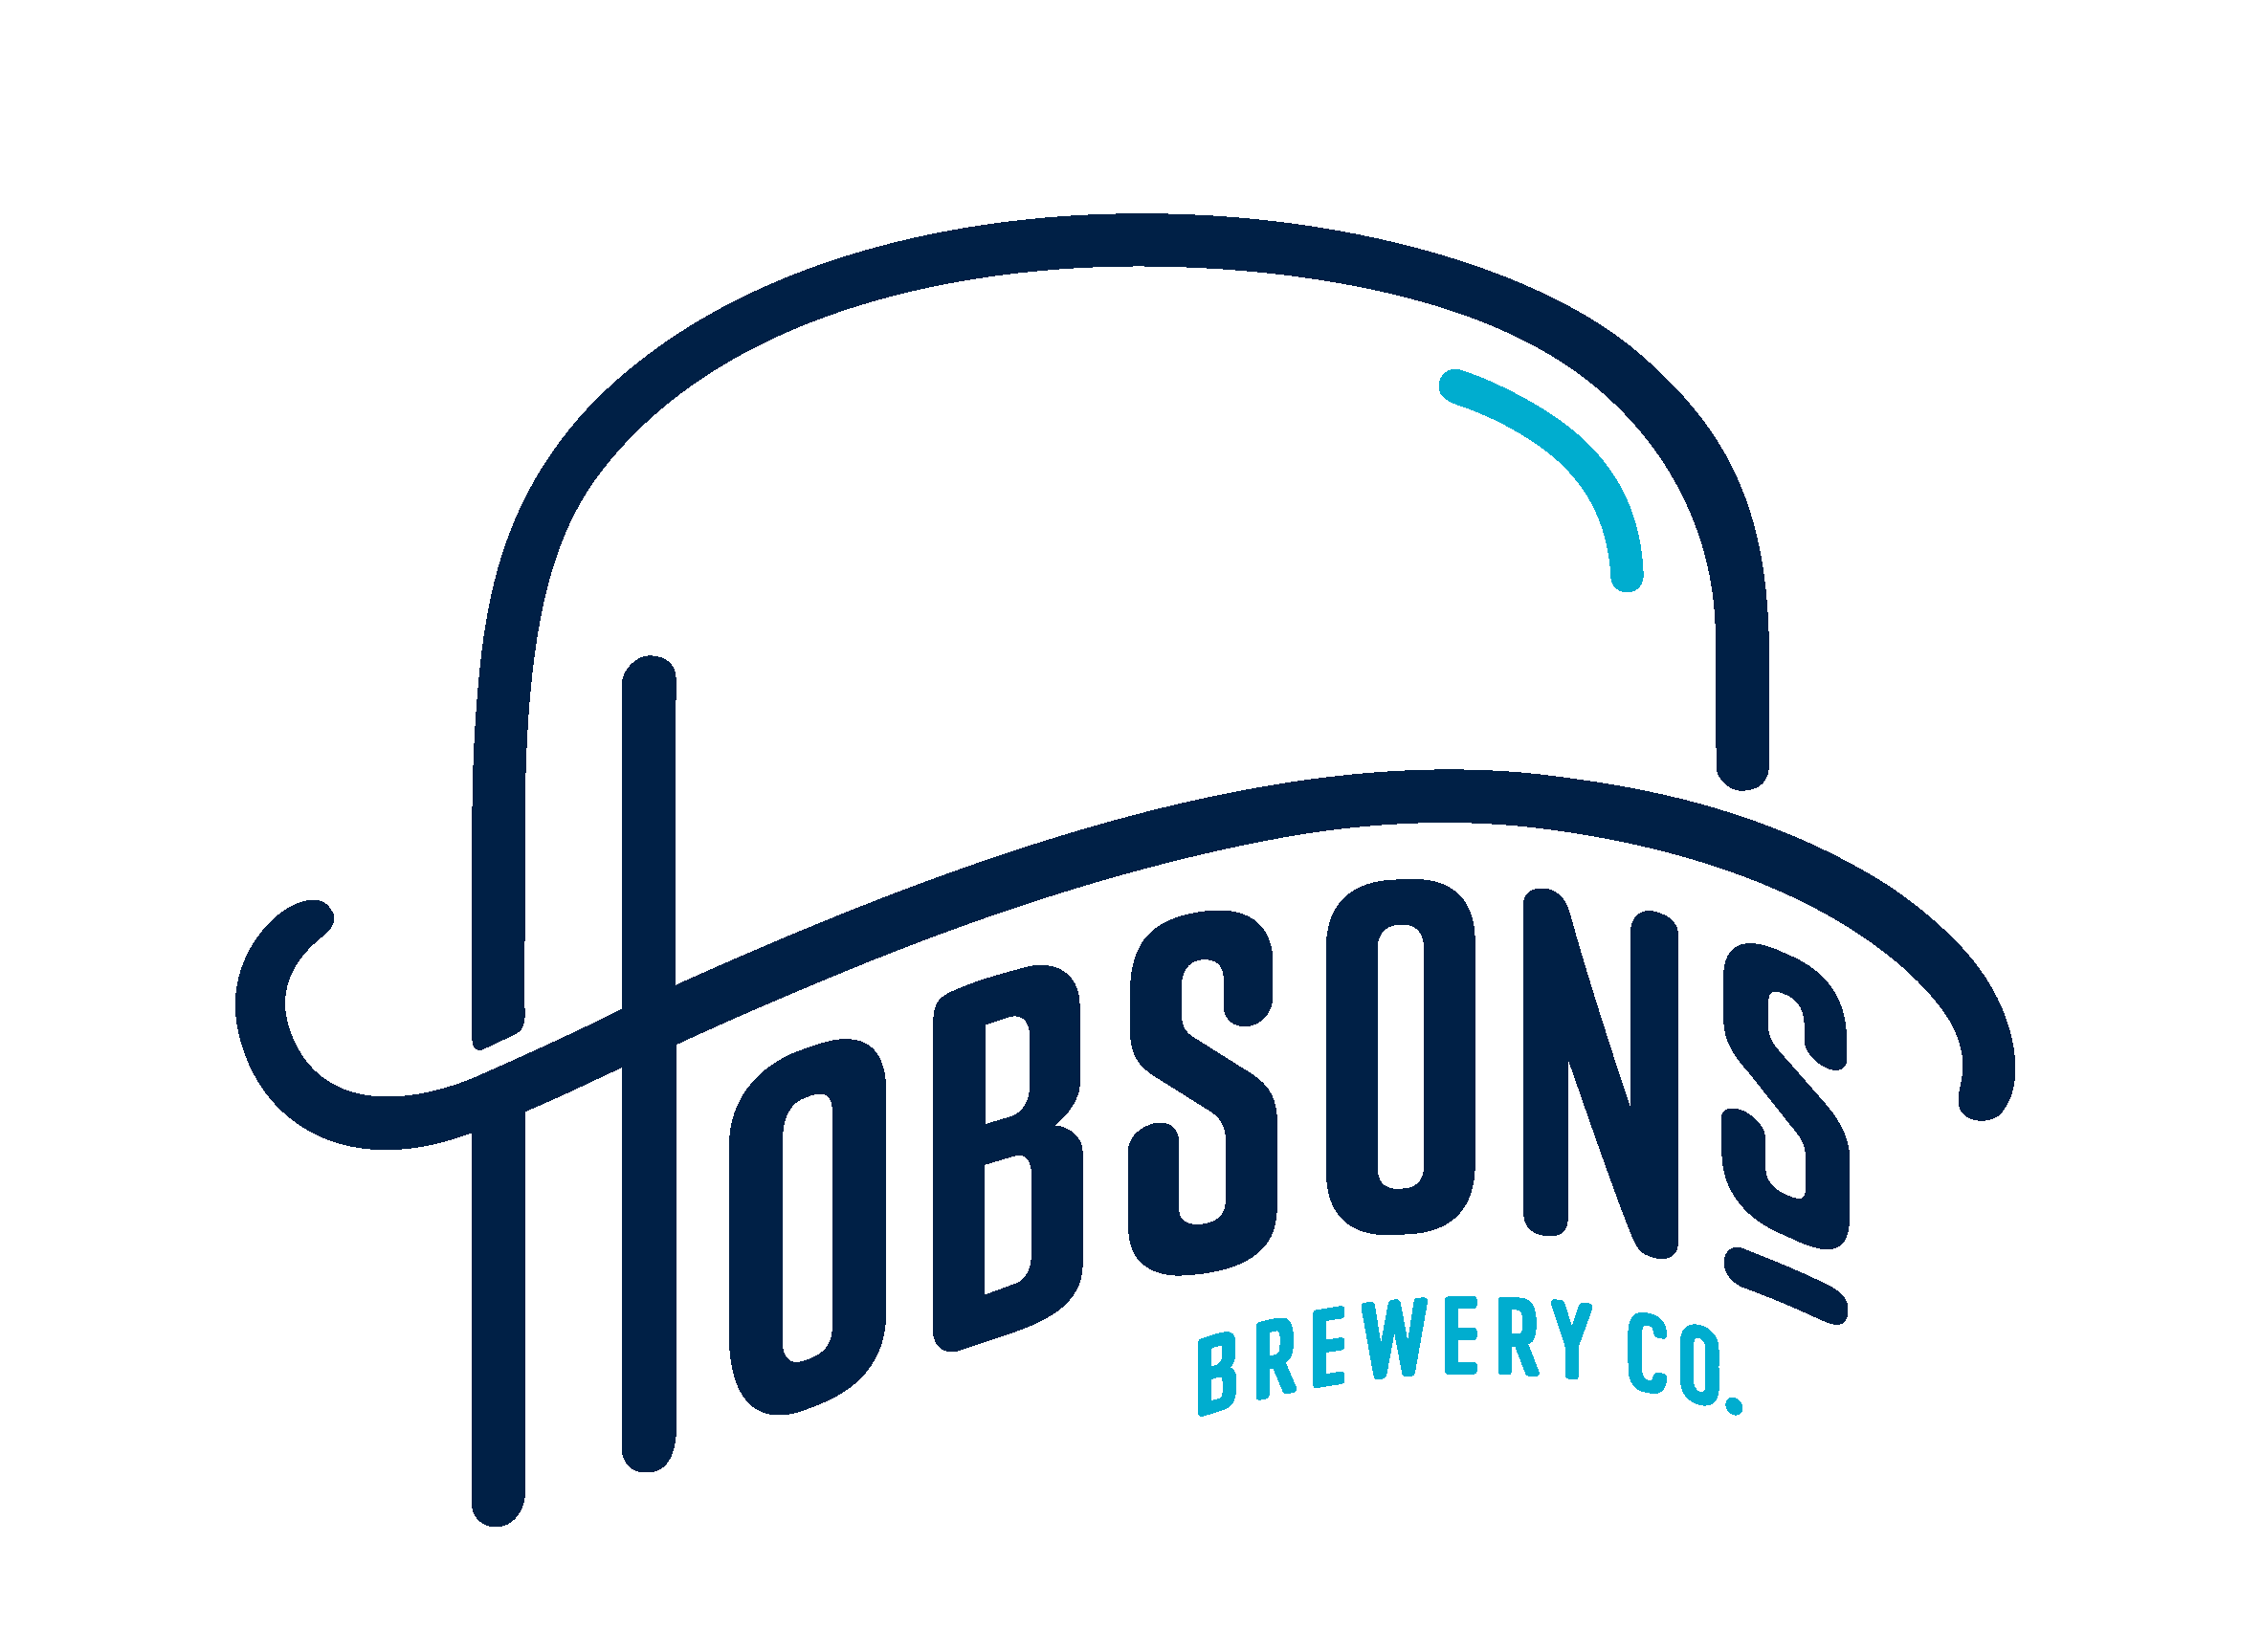 Hobsons Brewery Co logo.